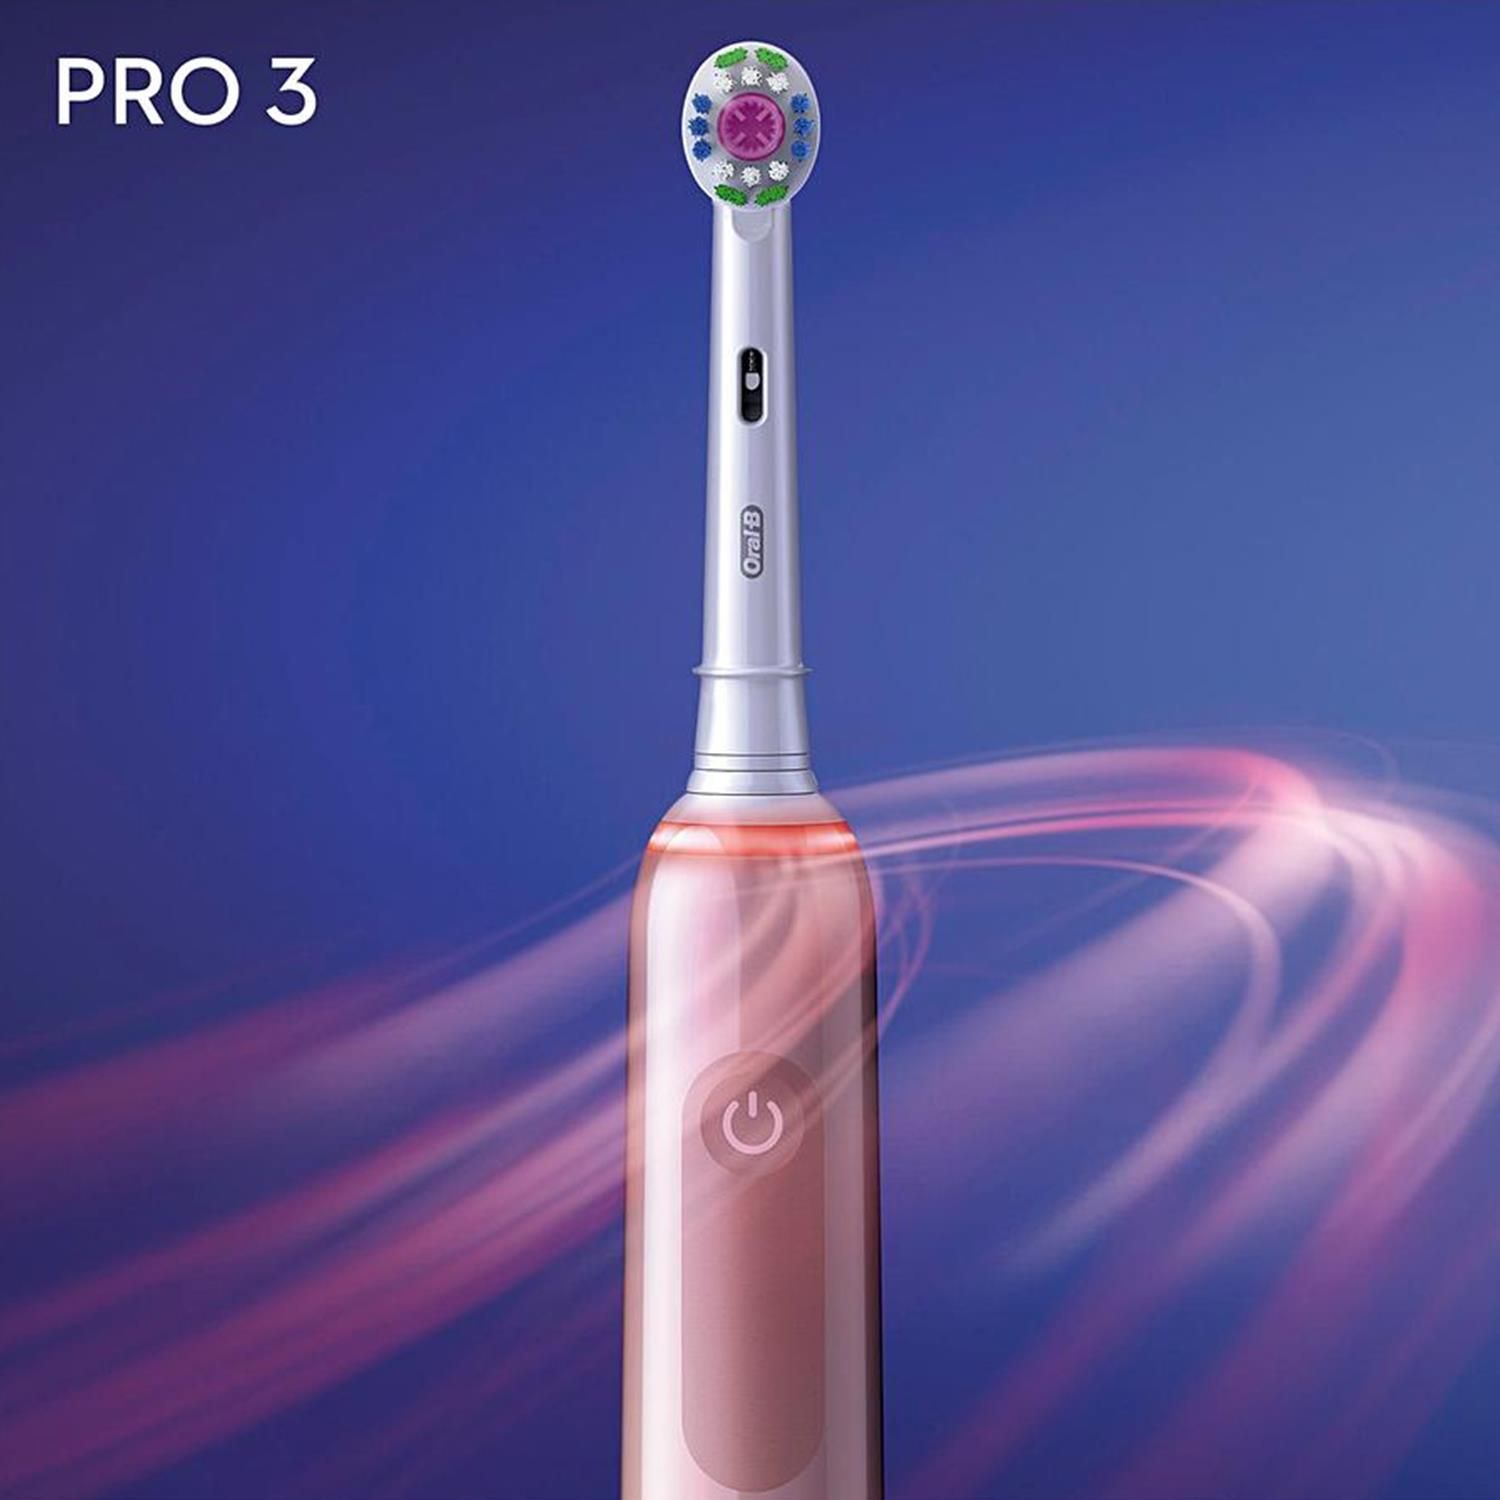 Oral-B Pro 3 3500 Electric Toothbrush with Smart Sensor Cross Action, Pink

Experience Oral-B Pro 3 from the #1 brand used by dentists worldwide. The sleek handle of the Pro 3 electric toothbrush helps you brush like your dentist recommends: It helps you brush for 2 minutes with the professional timer and it notifies you every 30 seconds to change the area you are brushing. 

While you are just moving the brush around your mouth, Oral-B's unique round head does all the rest. It removes up to 100% more plaque than a standard manual toothbrush for healthier gums and it starts making your smile whiter as of the first day of brushing by removing surface stains. 

Not only this, but the toothbrush helps you protect your delicate gums with the 360 ÌŠgum pressure control technology that reduces brushing speed and alerts you to be gentler if you brush too hard. Oral-B Pro 3 is the must-have brush for everyone who wants to switch to an electric toothbrush and improve their oral health.

For a Clean that Wow: remove bacteria by removing up to 100% more plaque vs. a manual toothbrush
Deep Cleaning & Healthier Gums: With 360 ÌŠ Gum Pressure Control that visibly alerts you if you brush too hard
3 Brushing Mode: Daily clean, whitening and sensitive

Features:
Battery lasts more than 2 weeks with 1 charge with the Lithium-ION battery
Helps you brush like your dentist recommends
Helps you brush longer with the 2 minutes embedded timer
It removes up to 100% more plaque than a standard manual toothbrush
An ideal gift set 

Package Includes: 1x Oral-B Pro 3 Electric Toothbrush with Smart Pressure Sensor, 3500, Pink